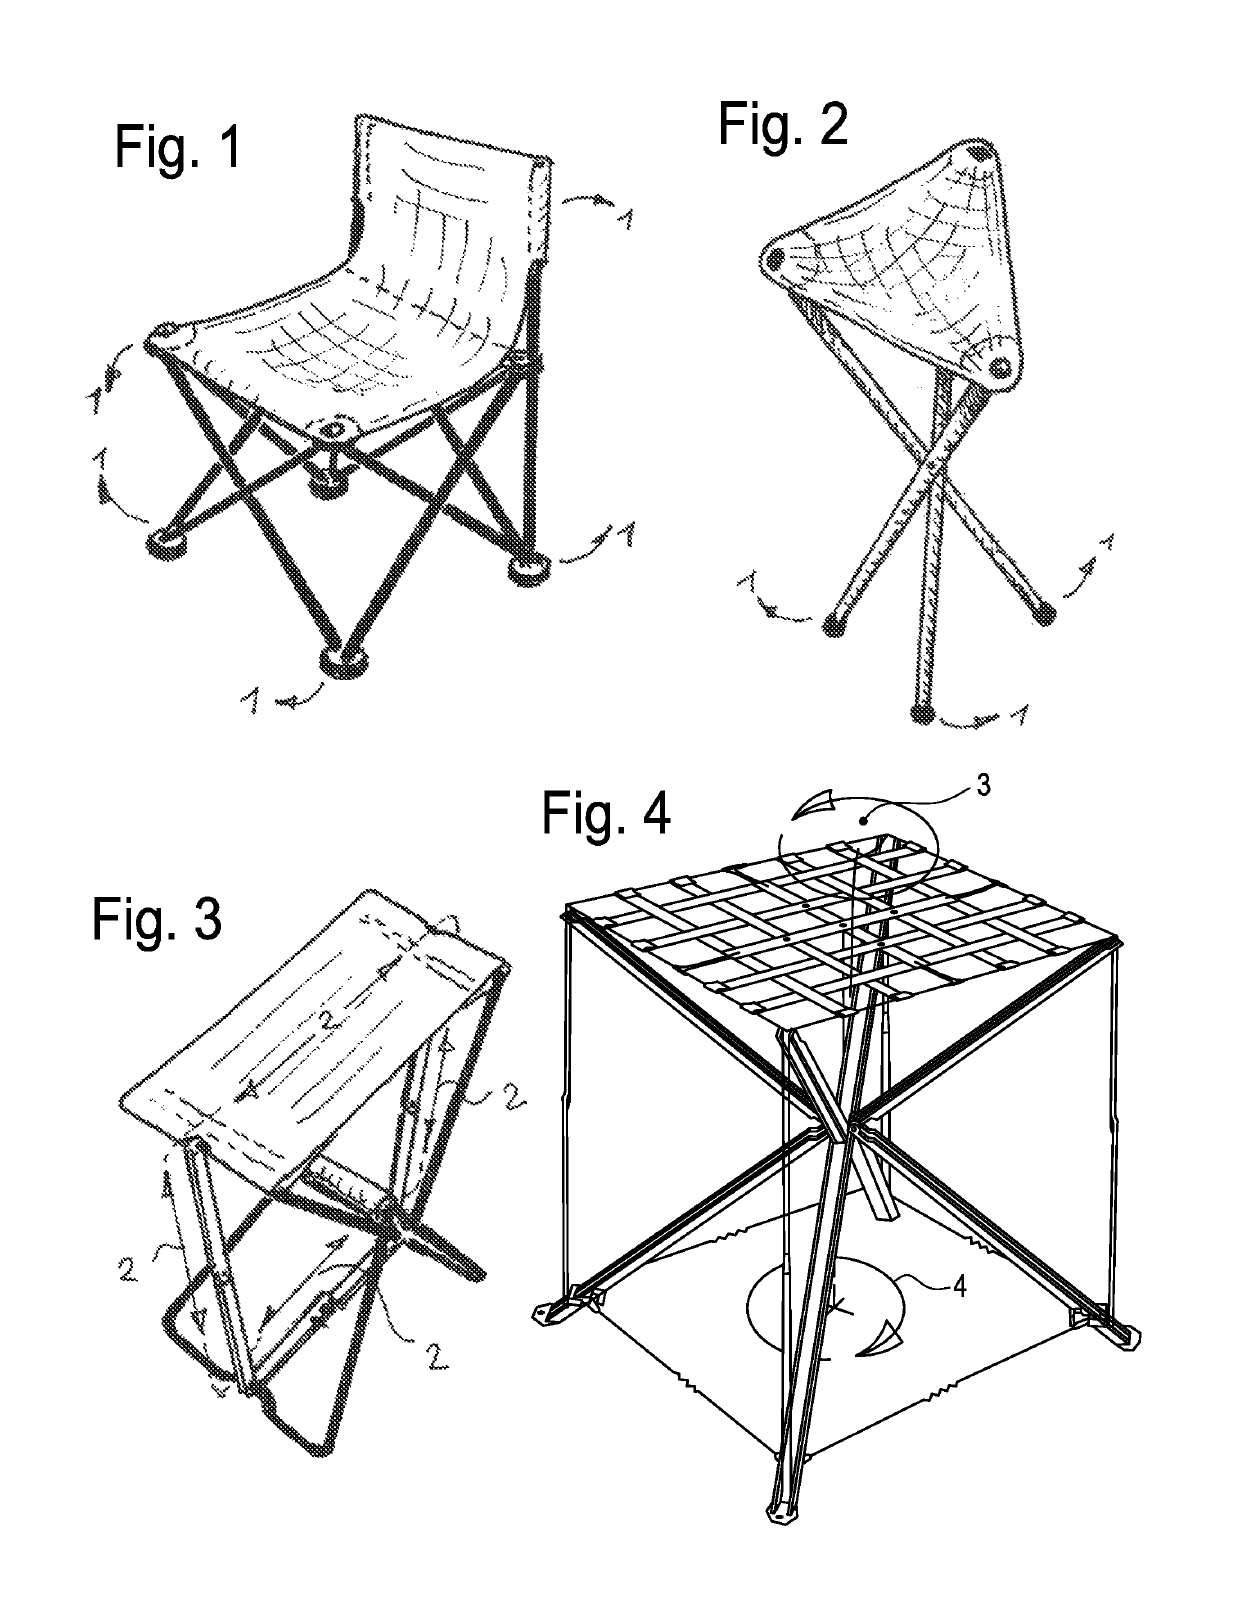 Support apparatus, such as a seat, foldable and portable